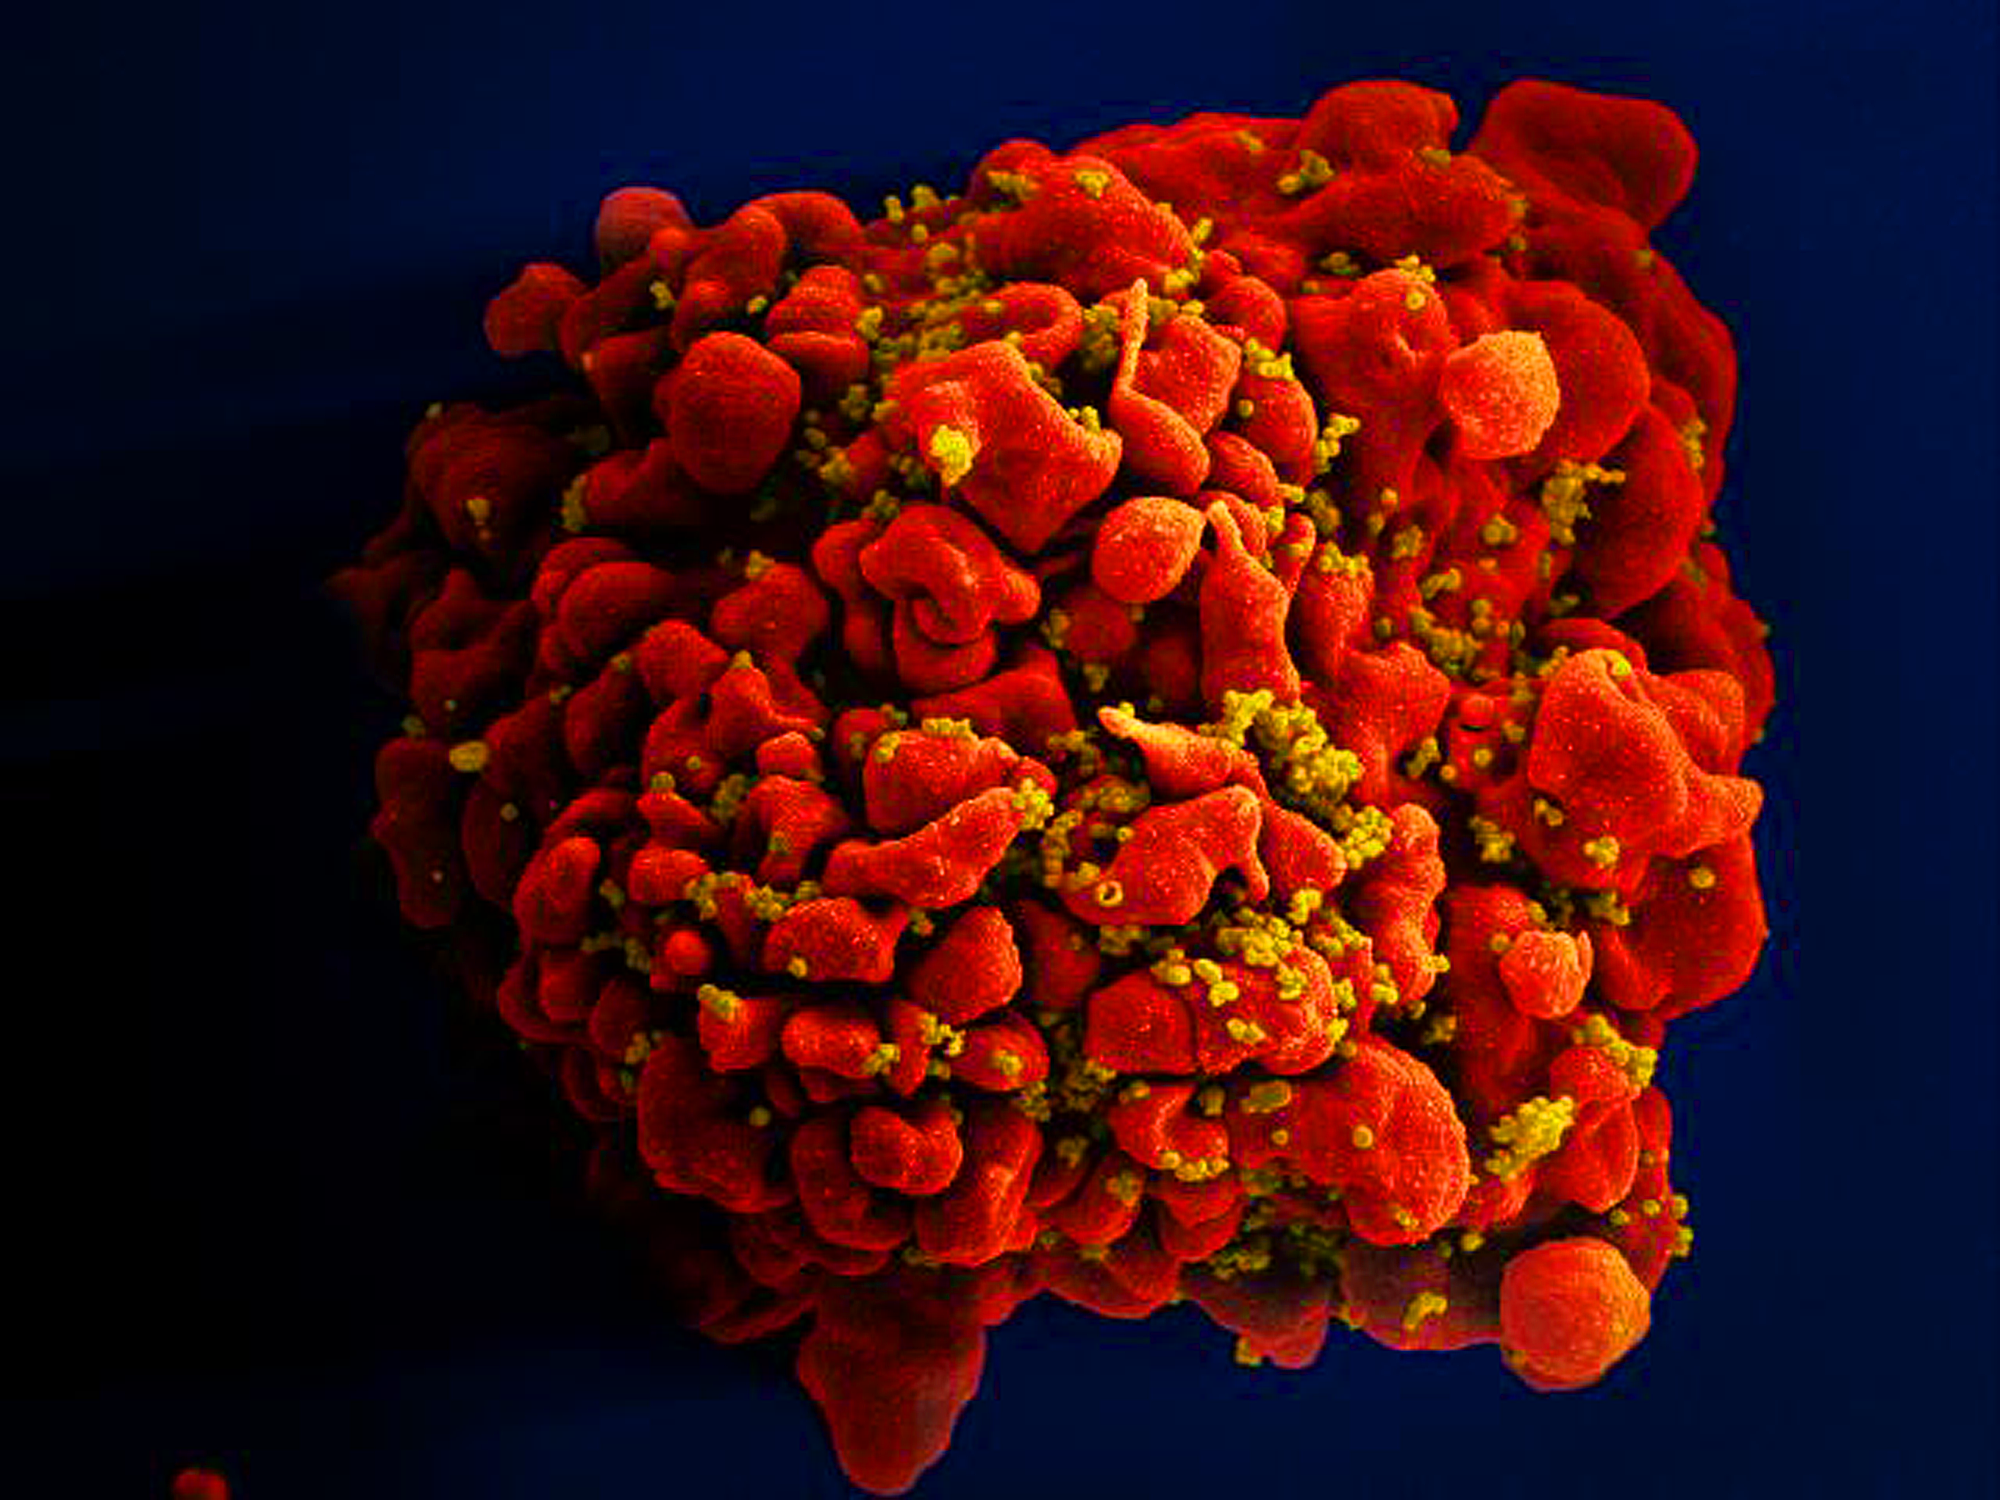 New HIV vaccine strengthens and lengthens immunity